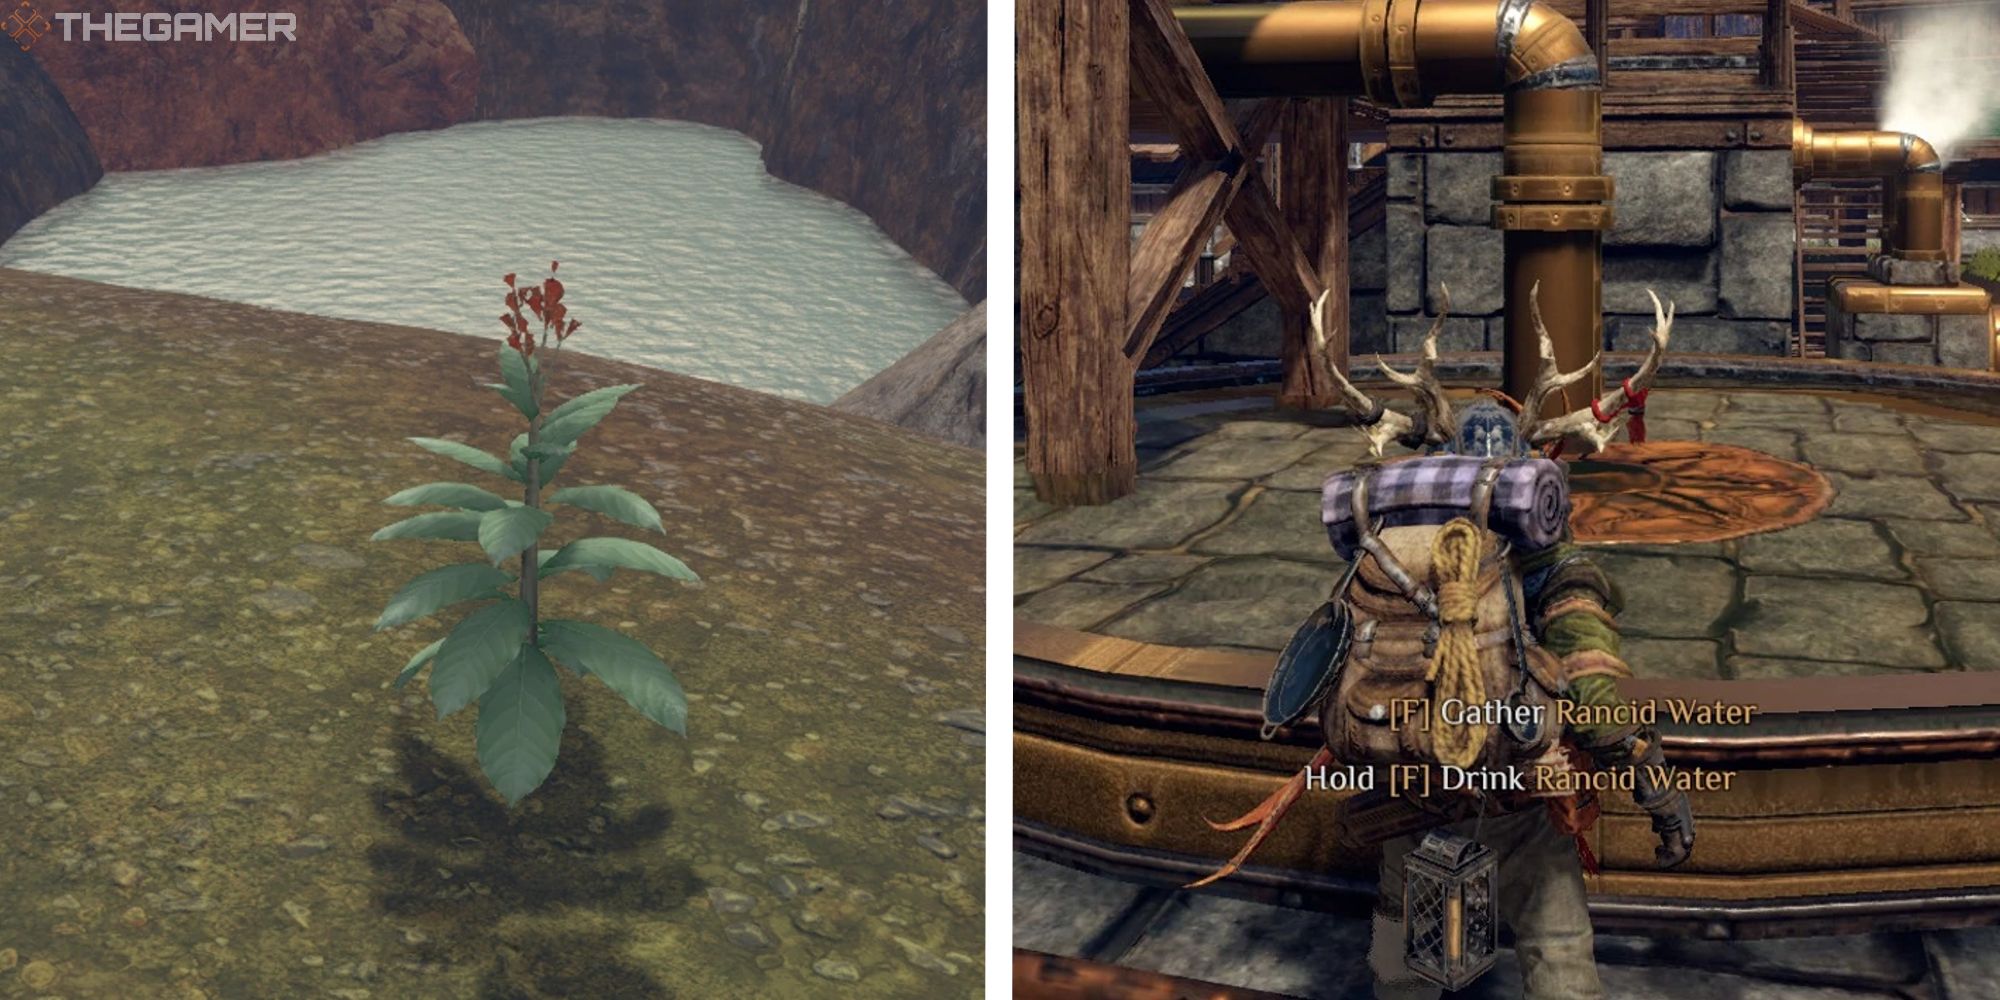 image of ambraine next to image of player standing in front of rancid water